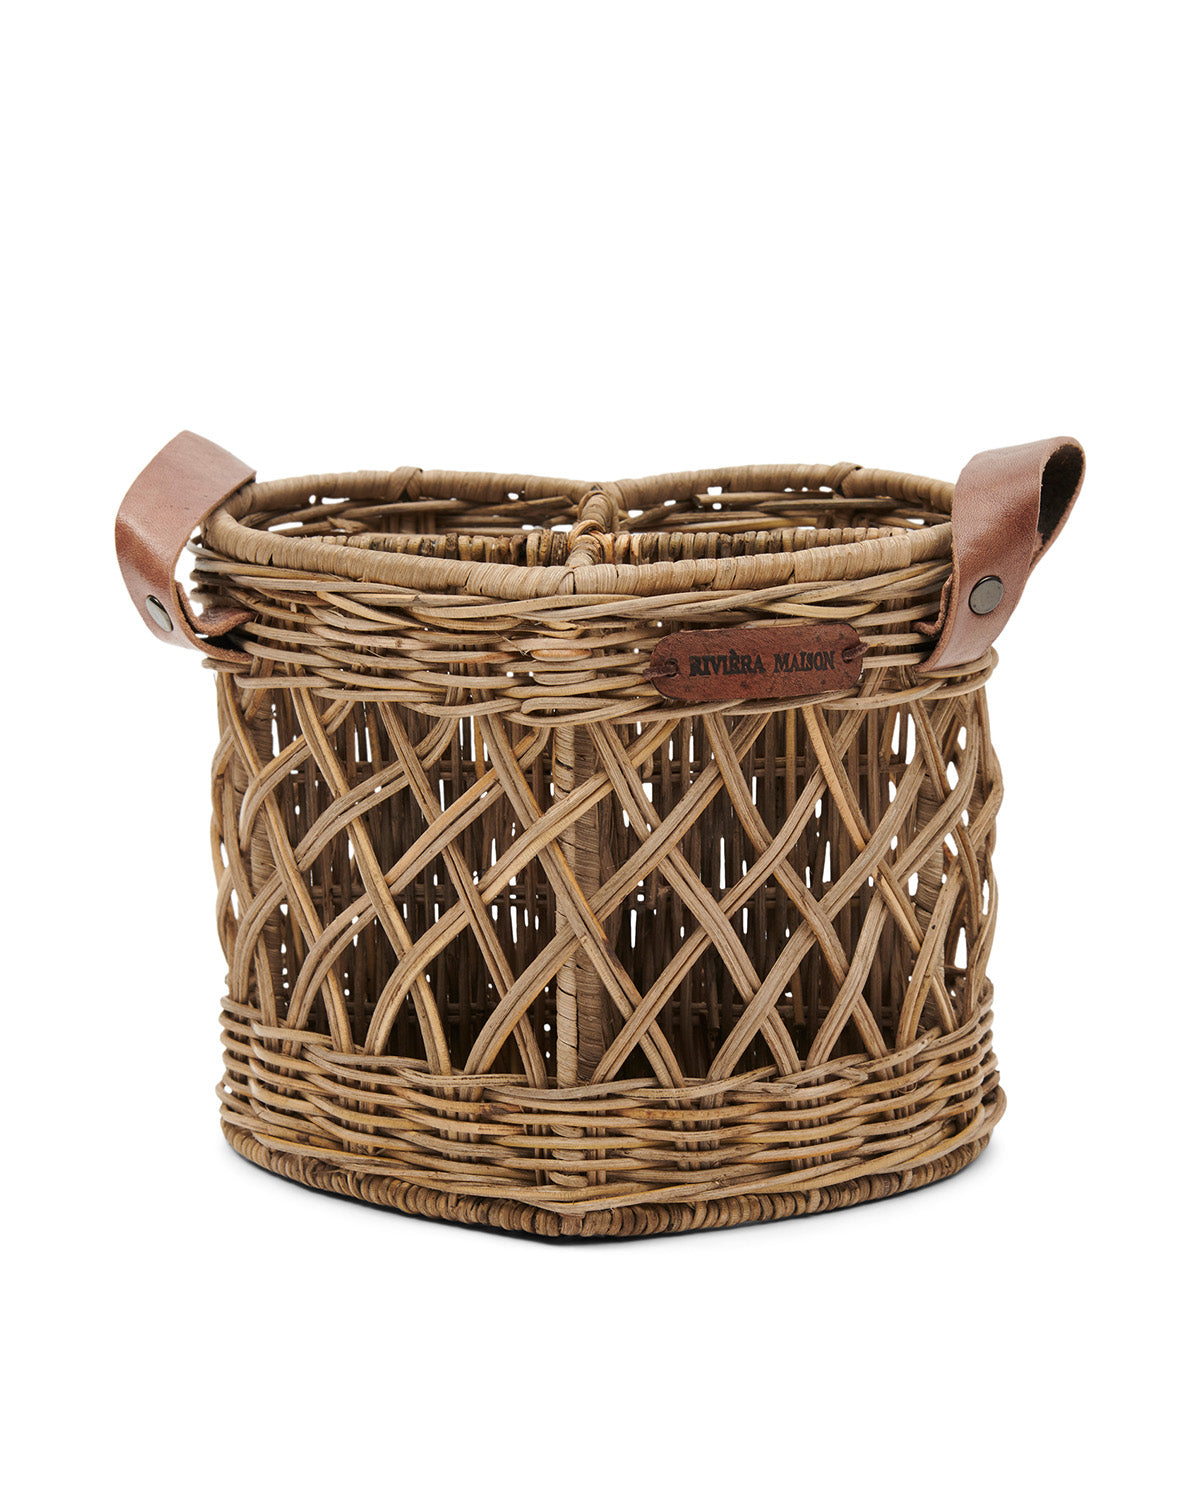 UTENSILS HOLDER HEART shape made from rattan with leather handles by Riviera Maison